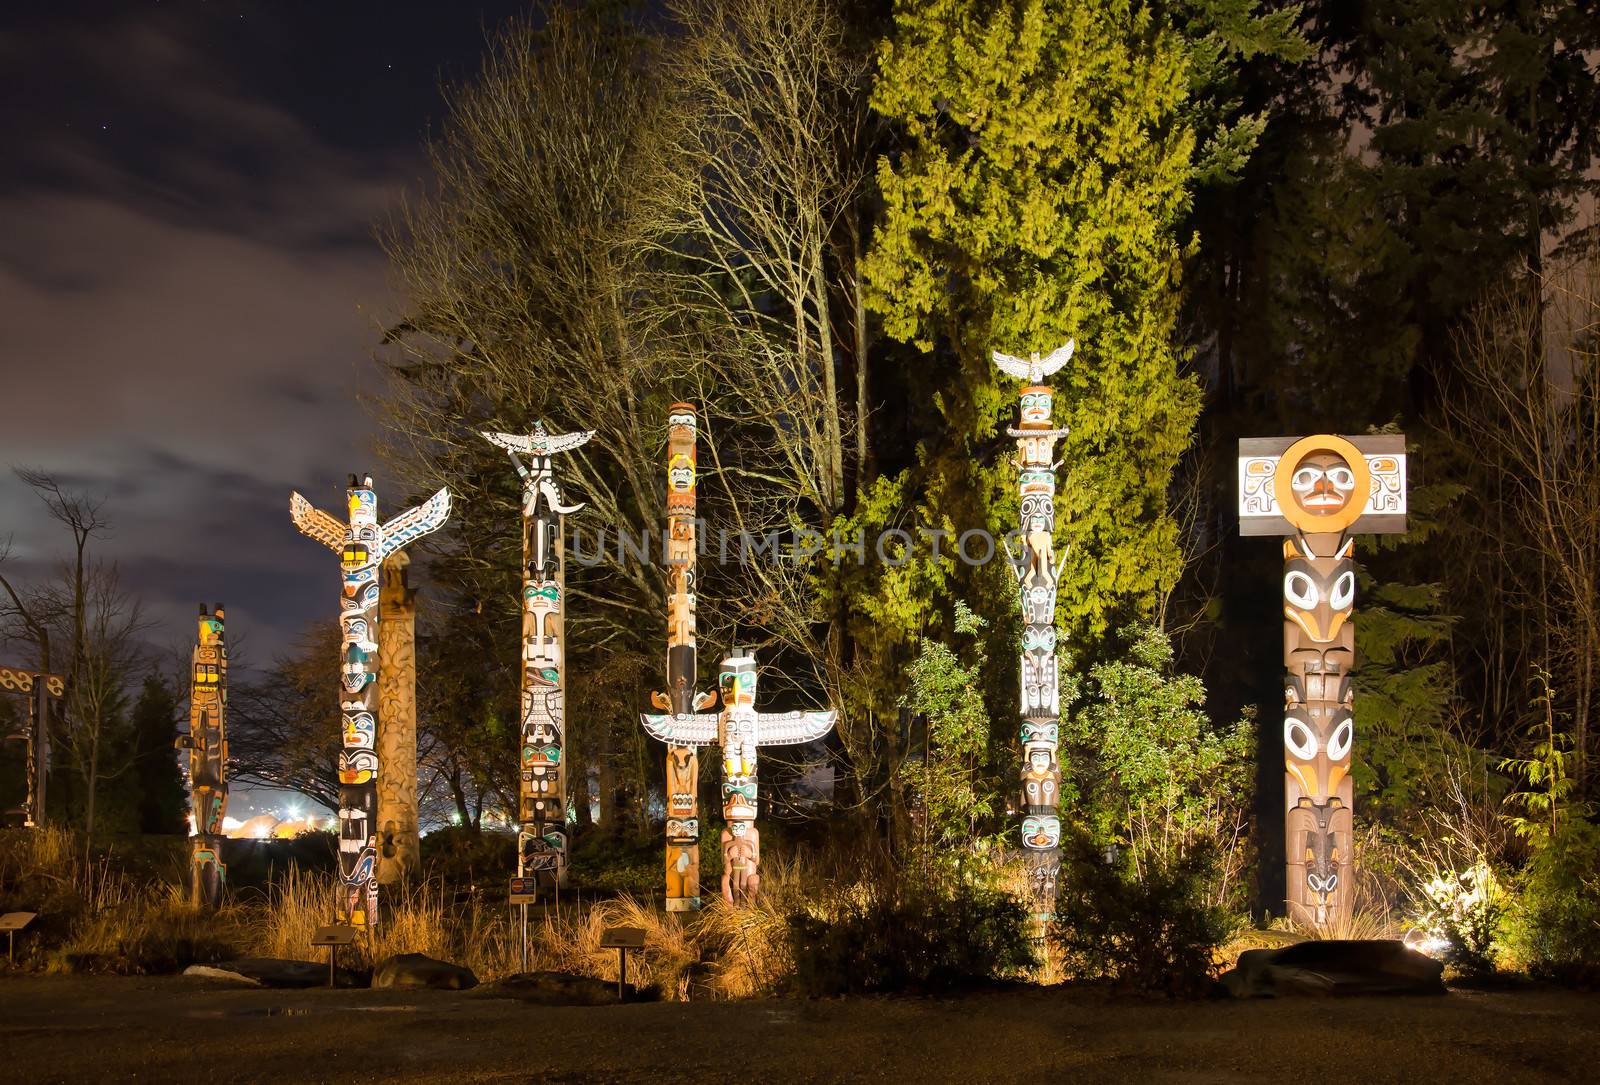 Totems in Stanley Park Vancouver at night by gary718